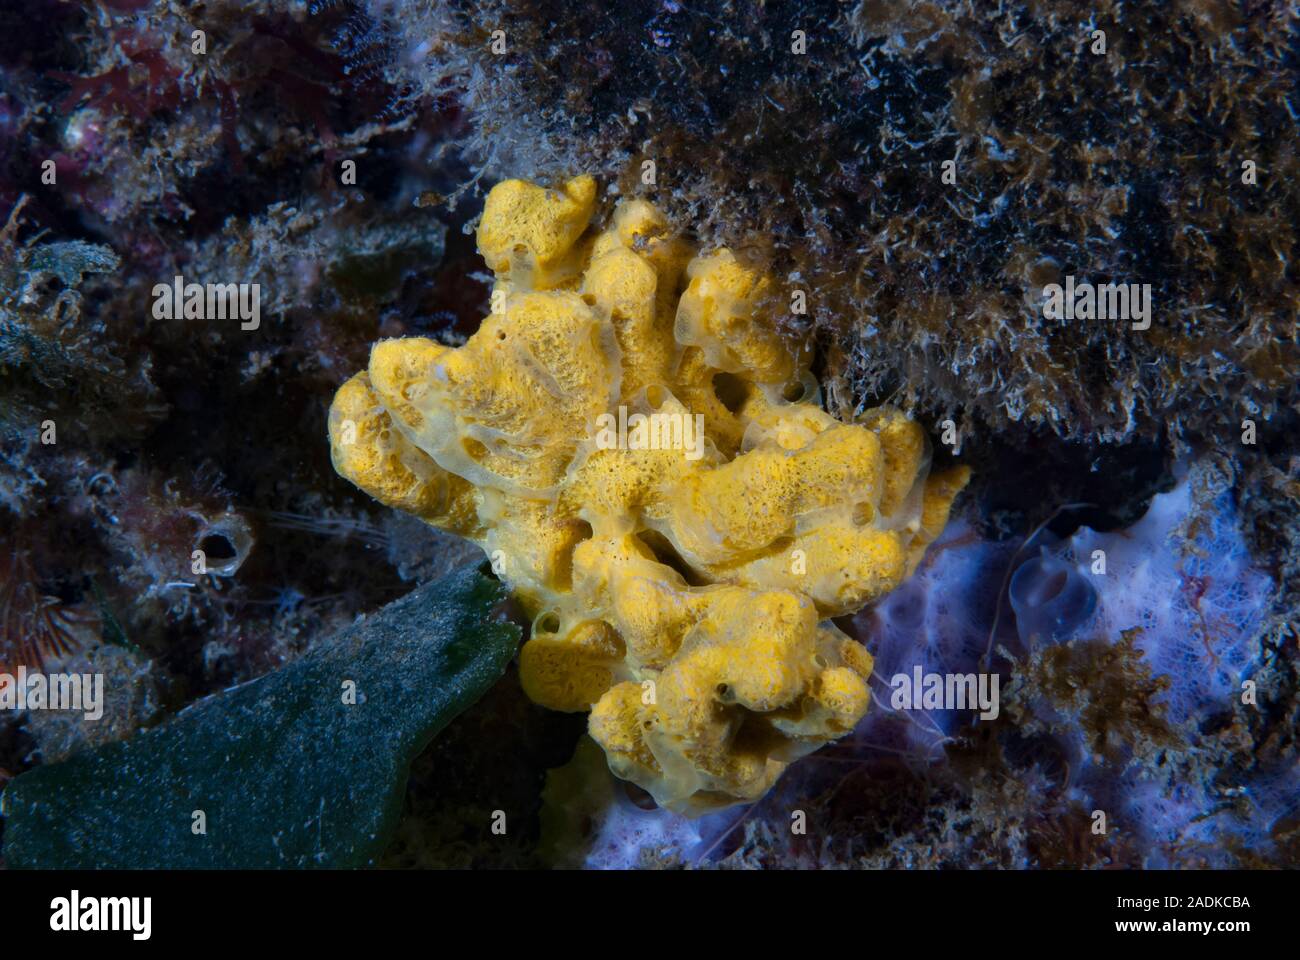 Underwater Photography Images Stock Photo